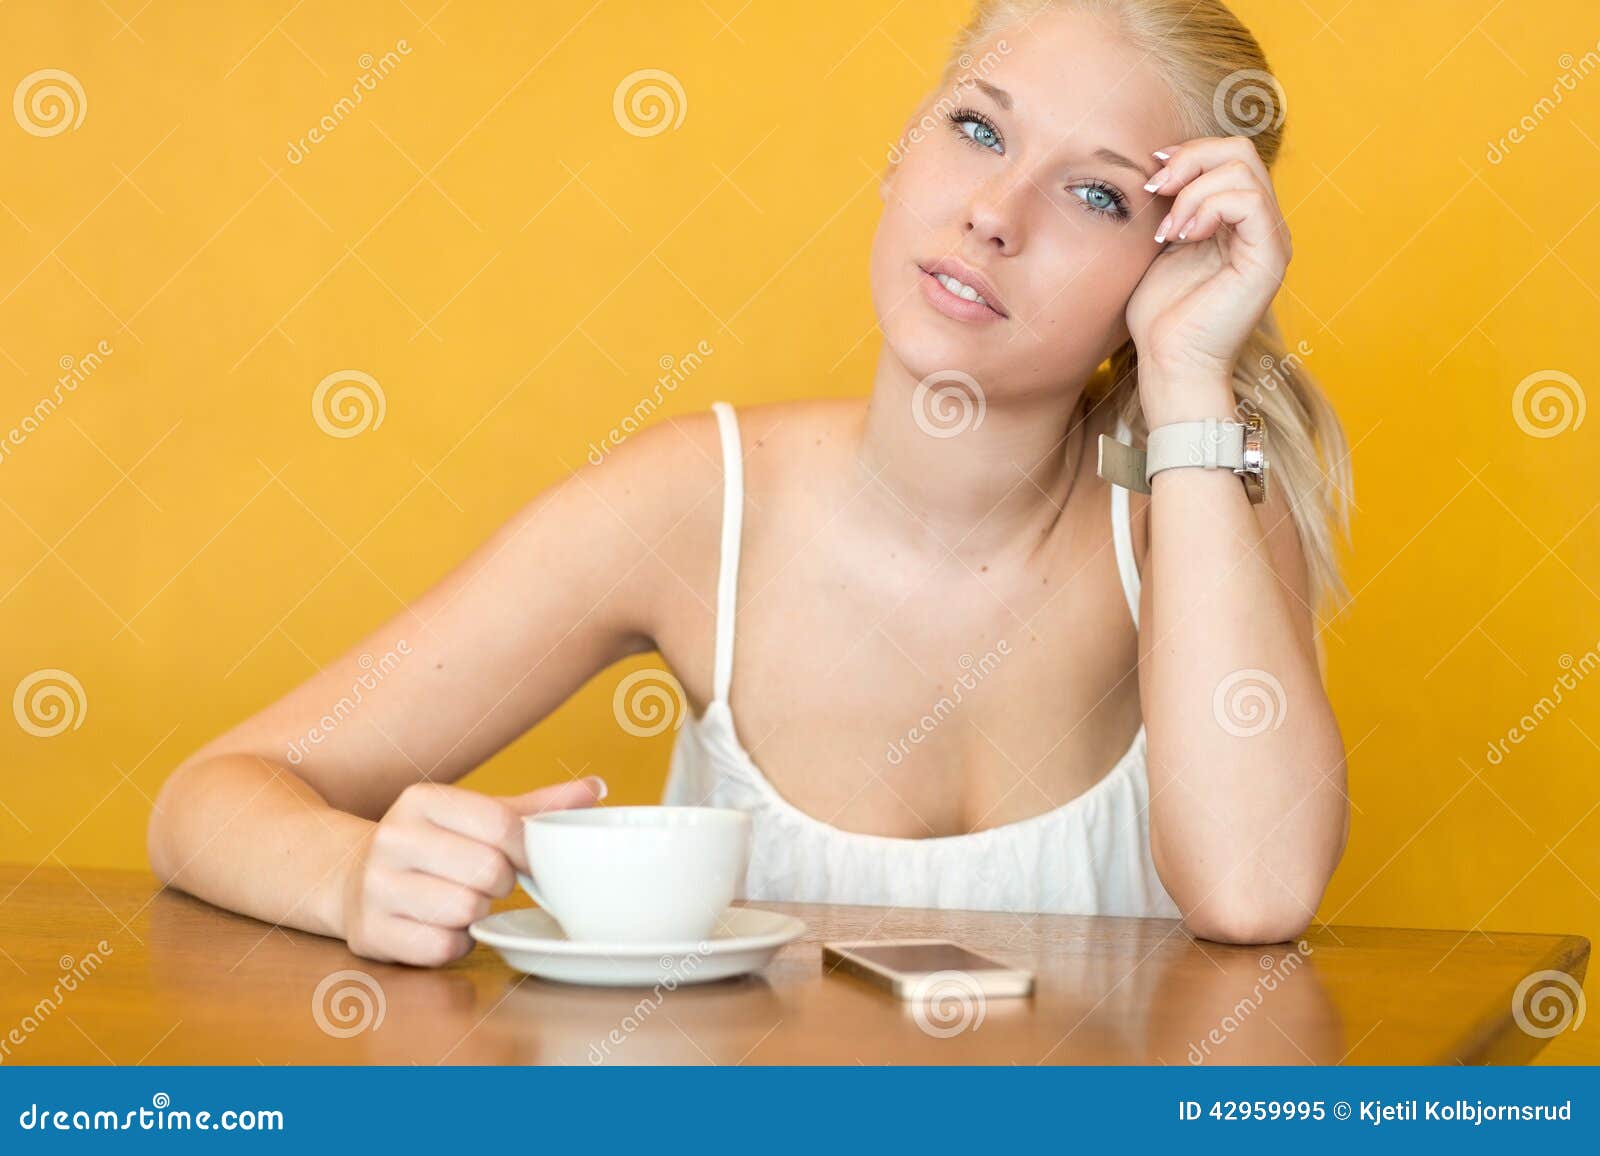 Smiling young woman drink coffee at cafe. Smiling beautiful blonde teen girl using phone and drinking coffee or tea at a cafe.